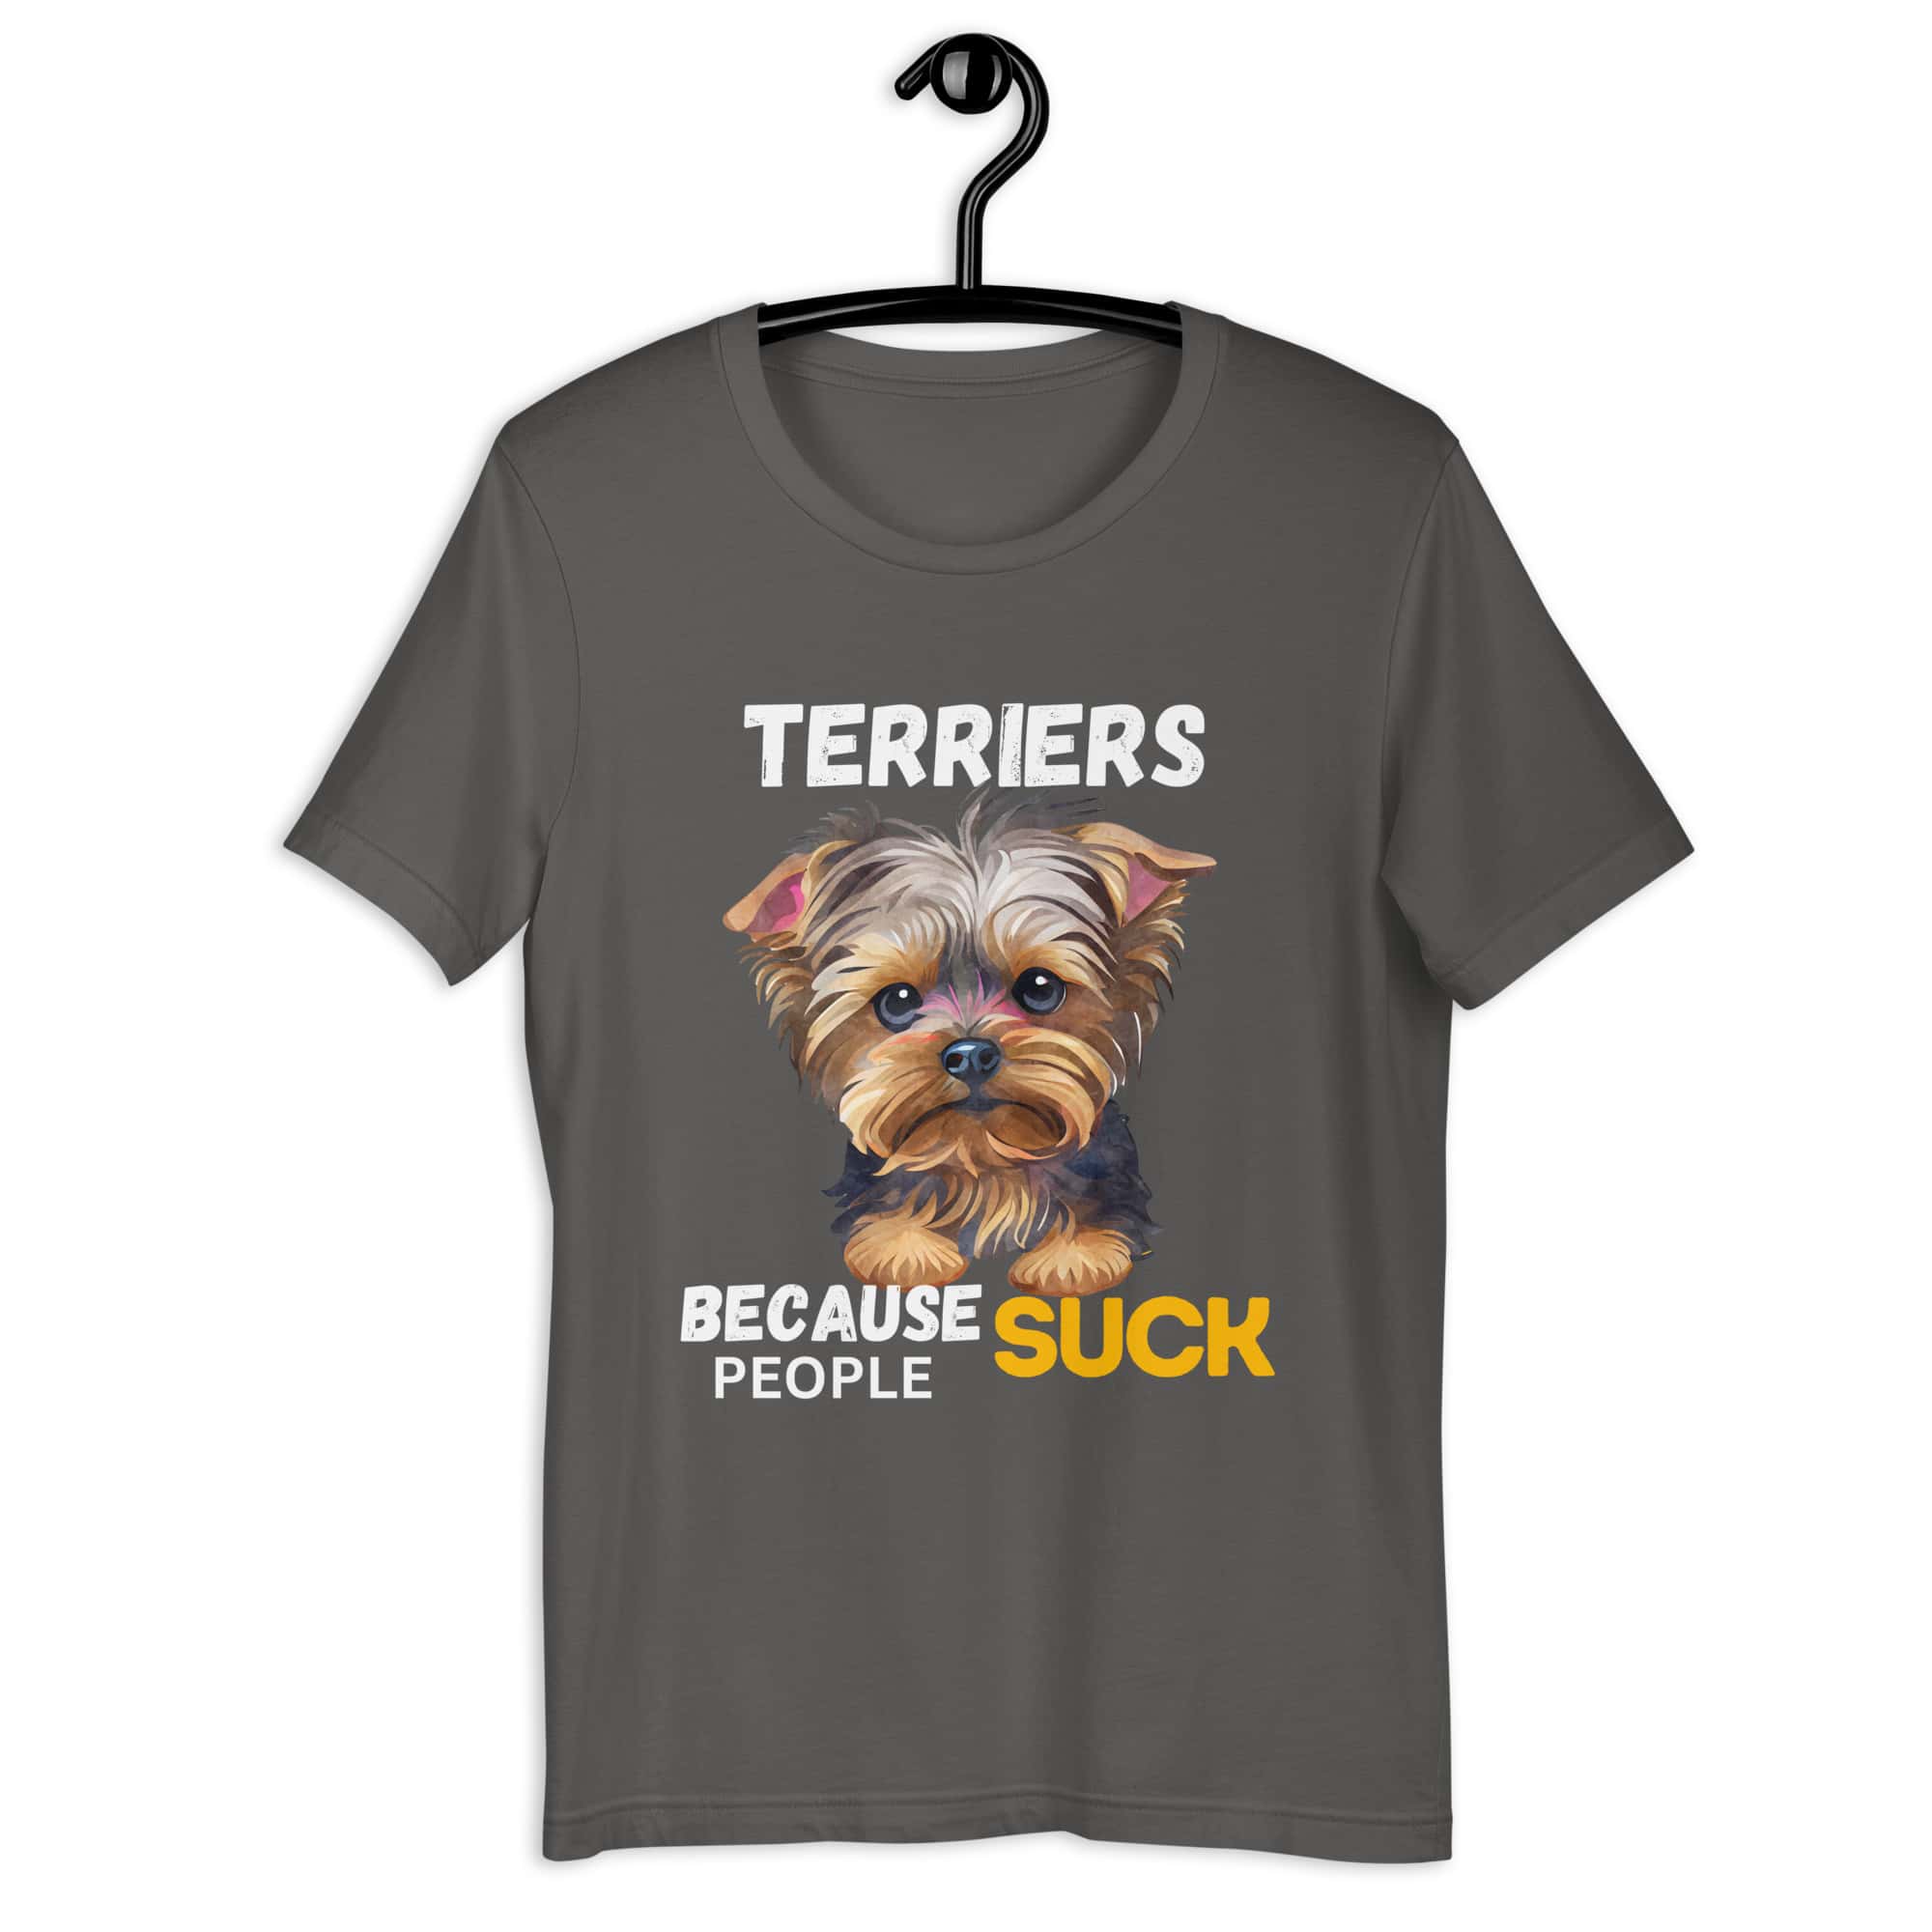 Terriers Because People Suck Unisex T-Shirt Gray